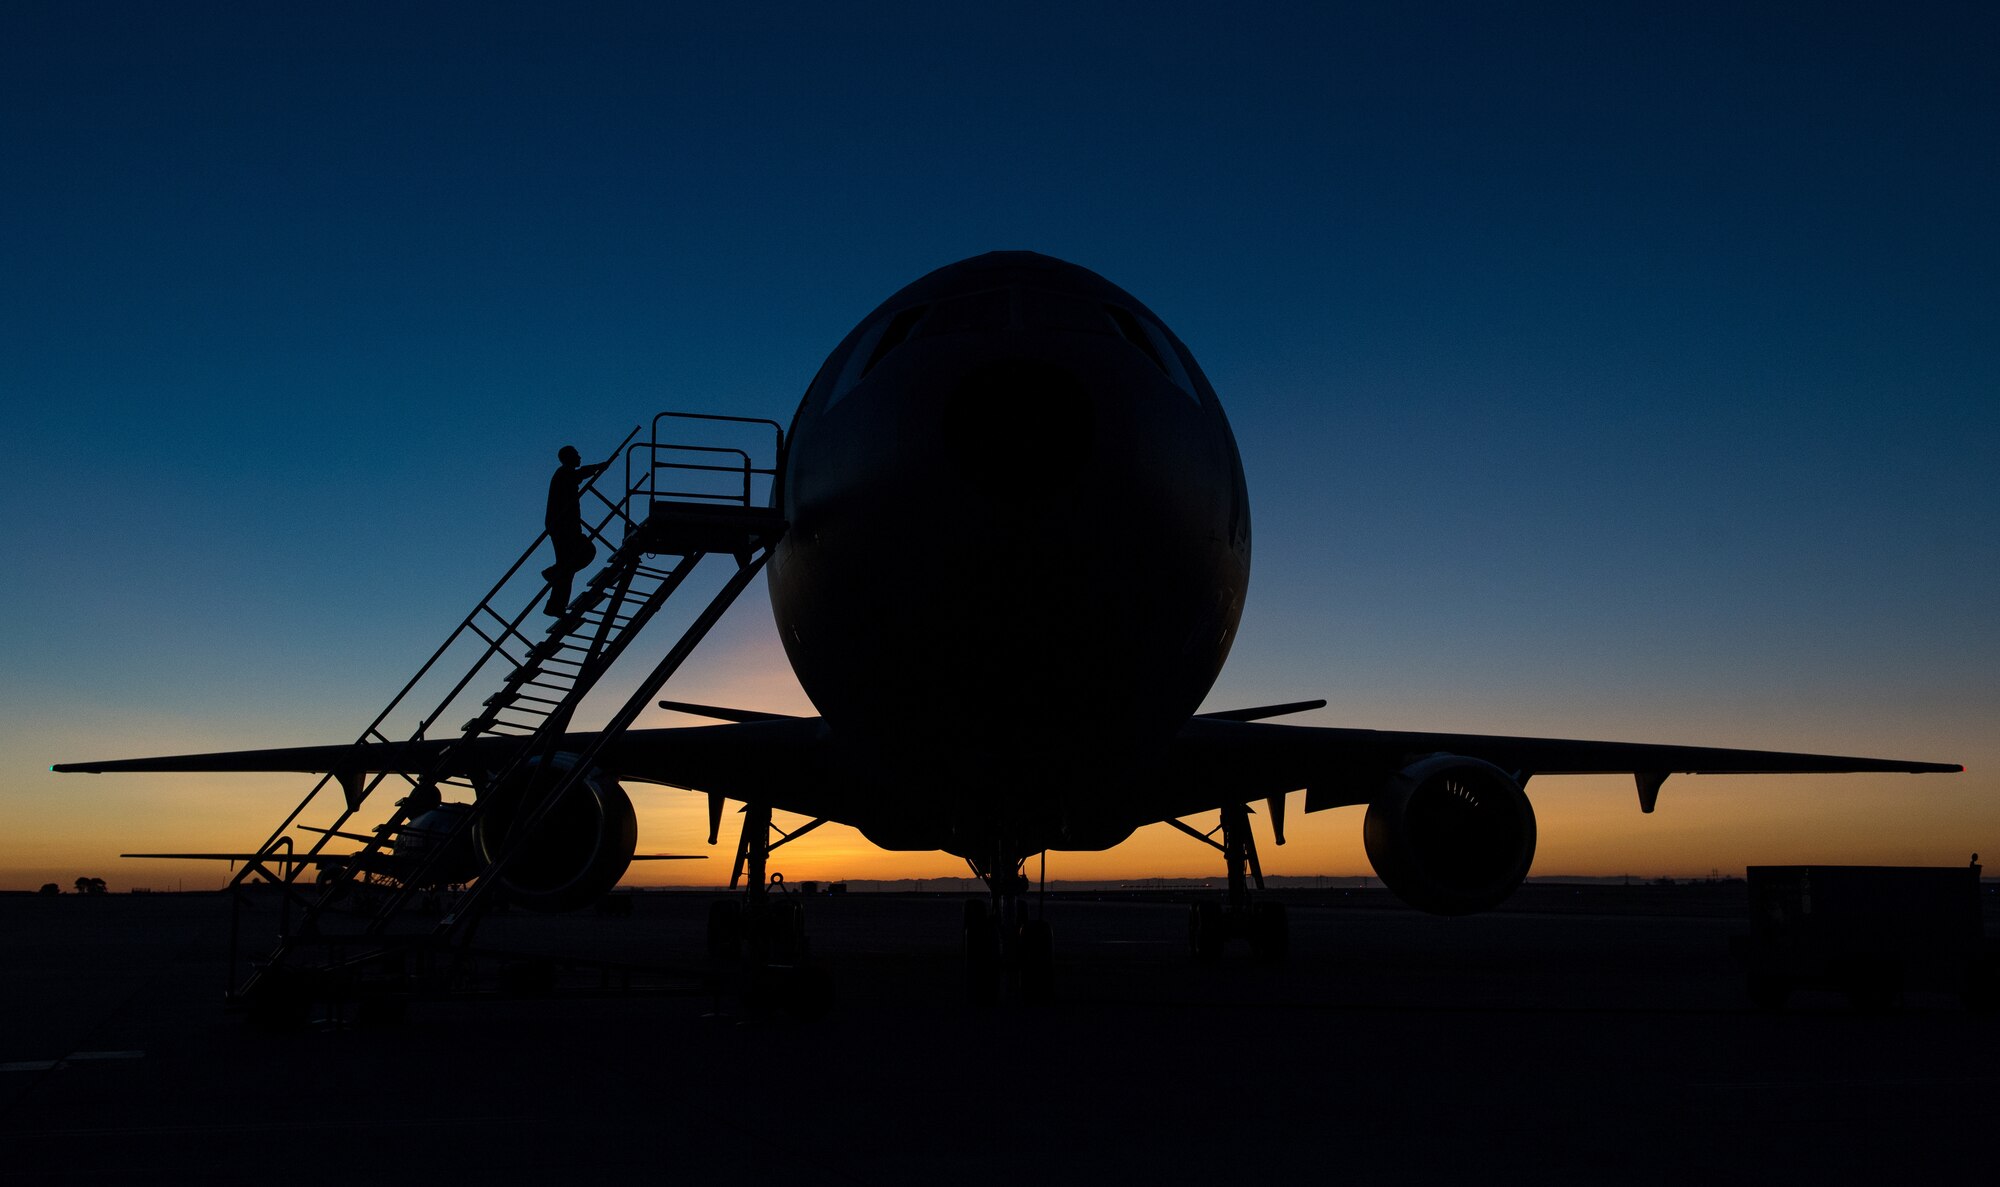 Airmen with the 6th Air Refueling Squadron prepare a KC-10 Extender before a mission to conduct a flyover for Maj. Brent Burklo’s funeral, July 16, 2019, at Travis Air Force Base, Calif. Burklo was a KC-10 pilot at the 6th ARS who died July 10, 2019, after a two-year battle with cancer. (U.S. Air Force photo by Master Sgt. Joey Swafford)